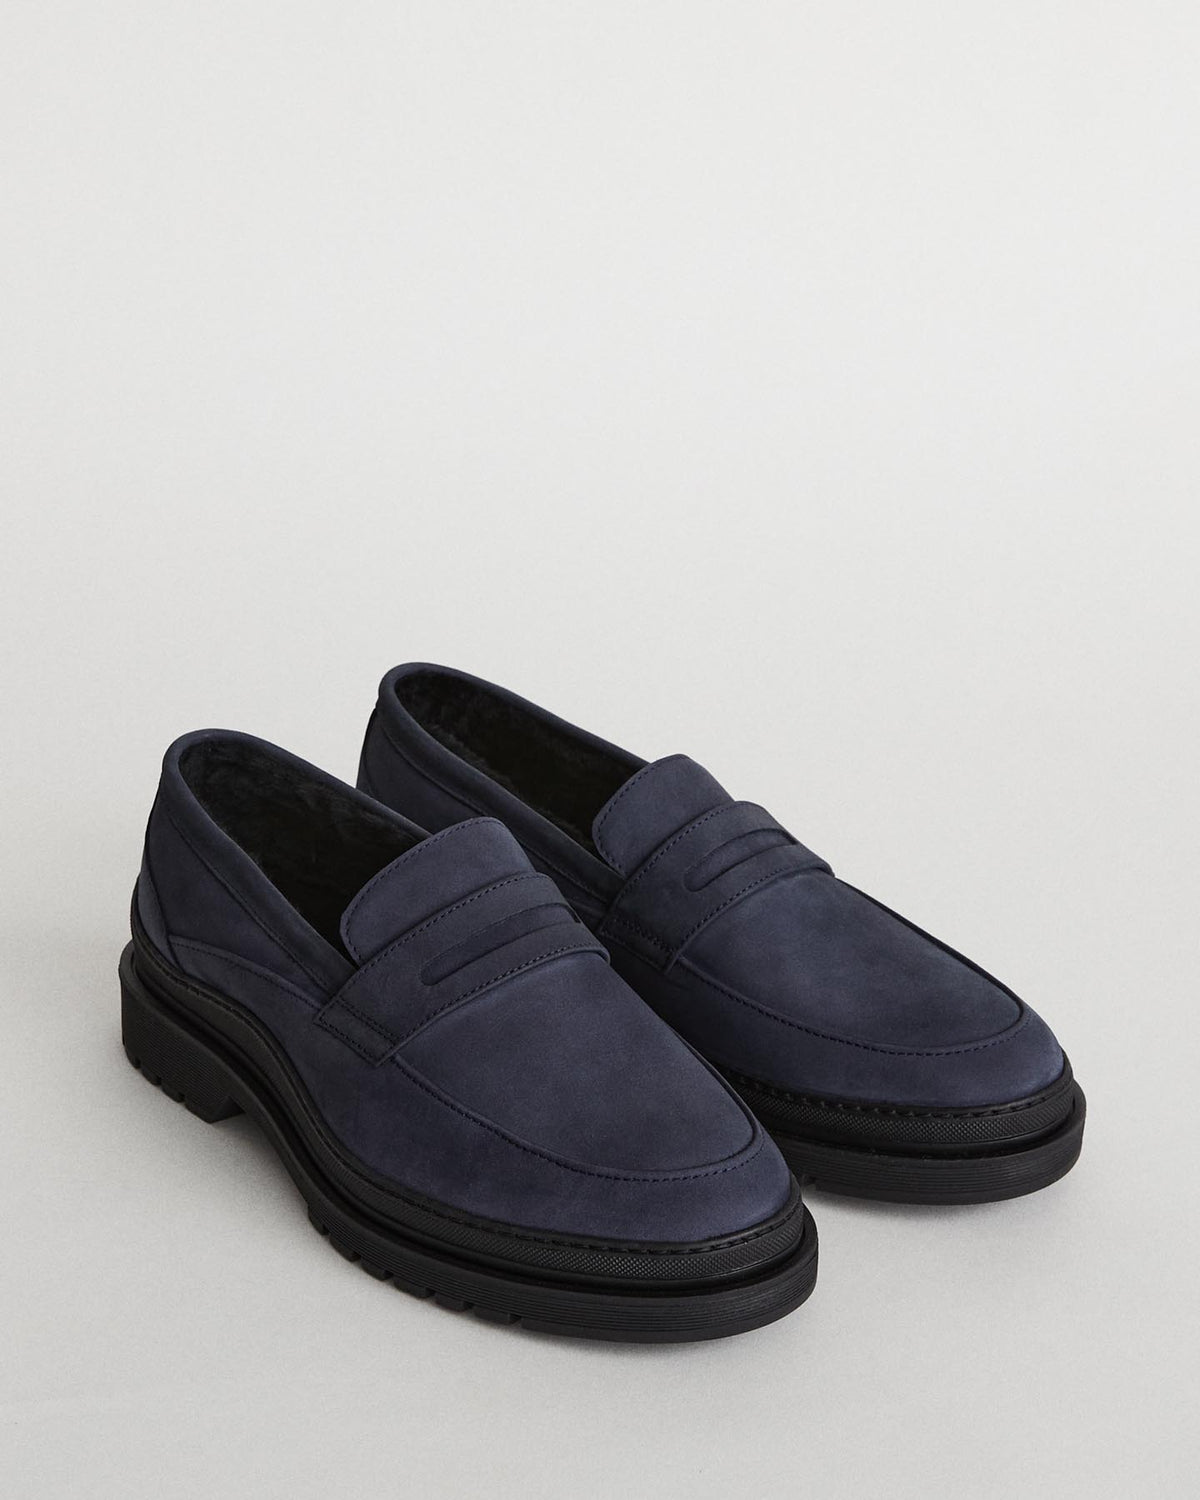 Graves Shearling Lugged Loafer